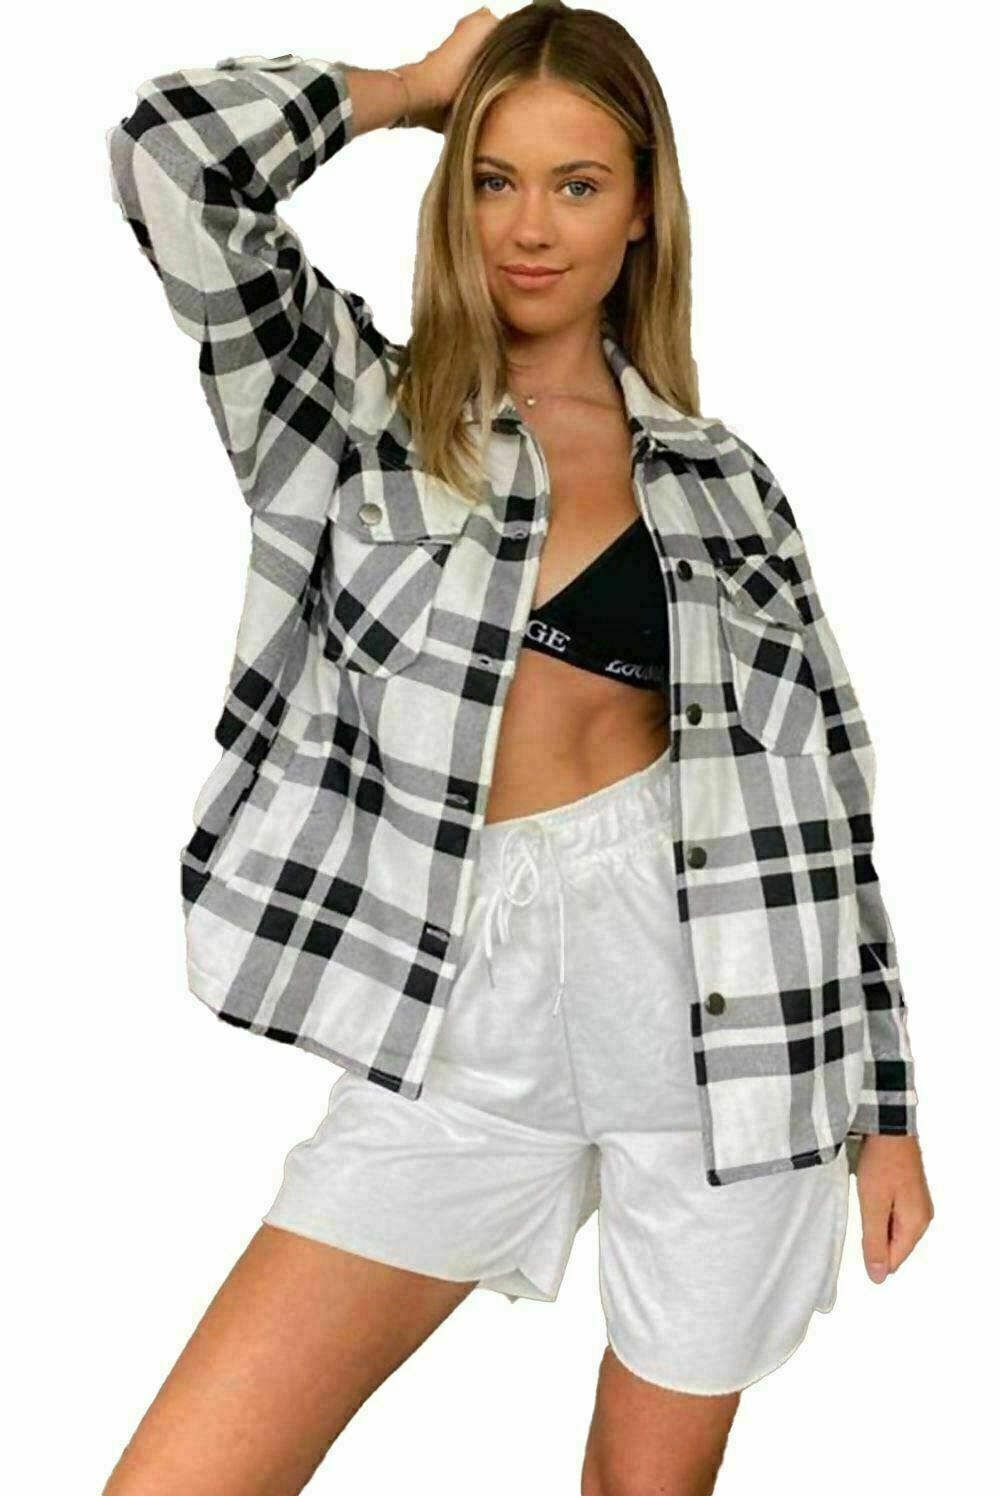 Ladies Oversized Shirt In A Black Check Design. Available In Sizes 4-8, 8-10, 12-14, 16-18. They Are Perfect To Wear Over A T-Shirt & Jeans As A Jacket.